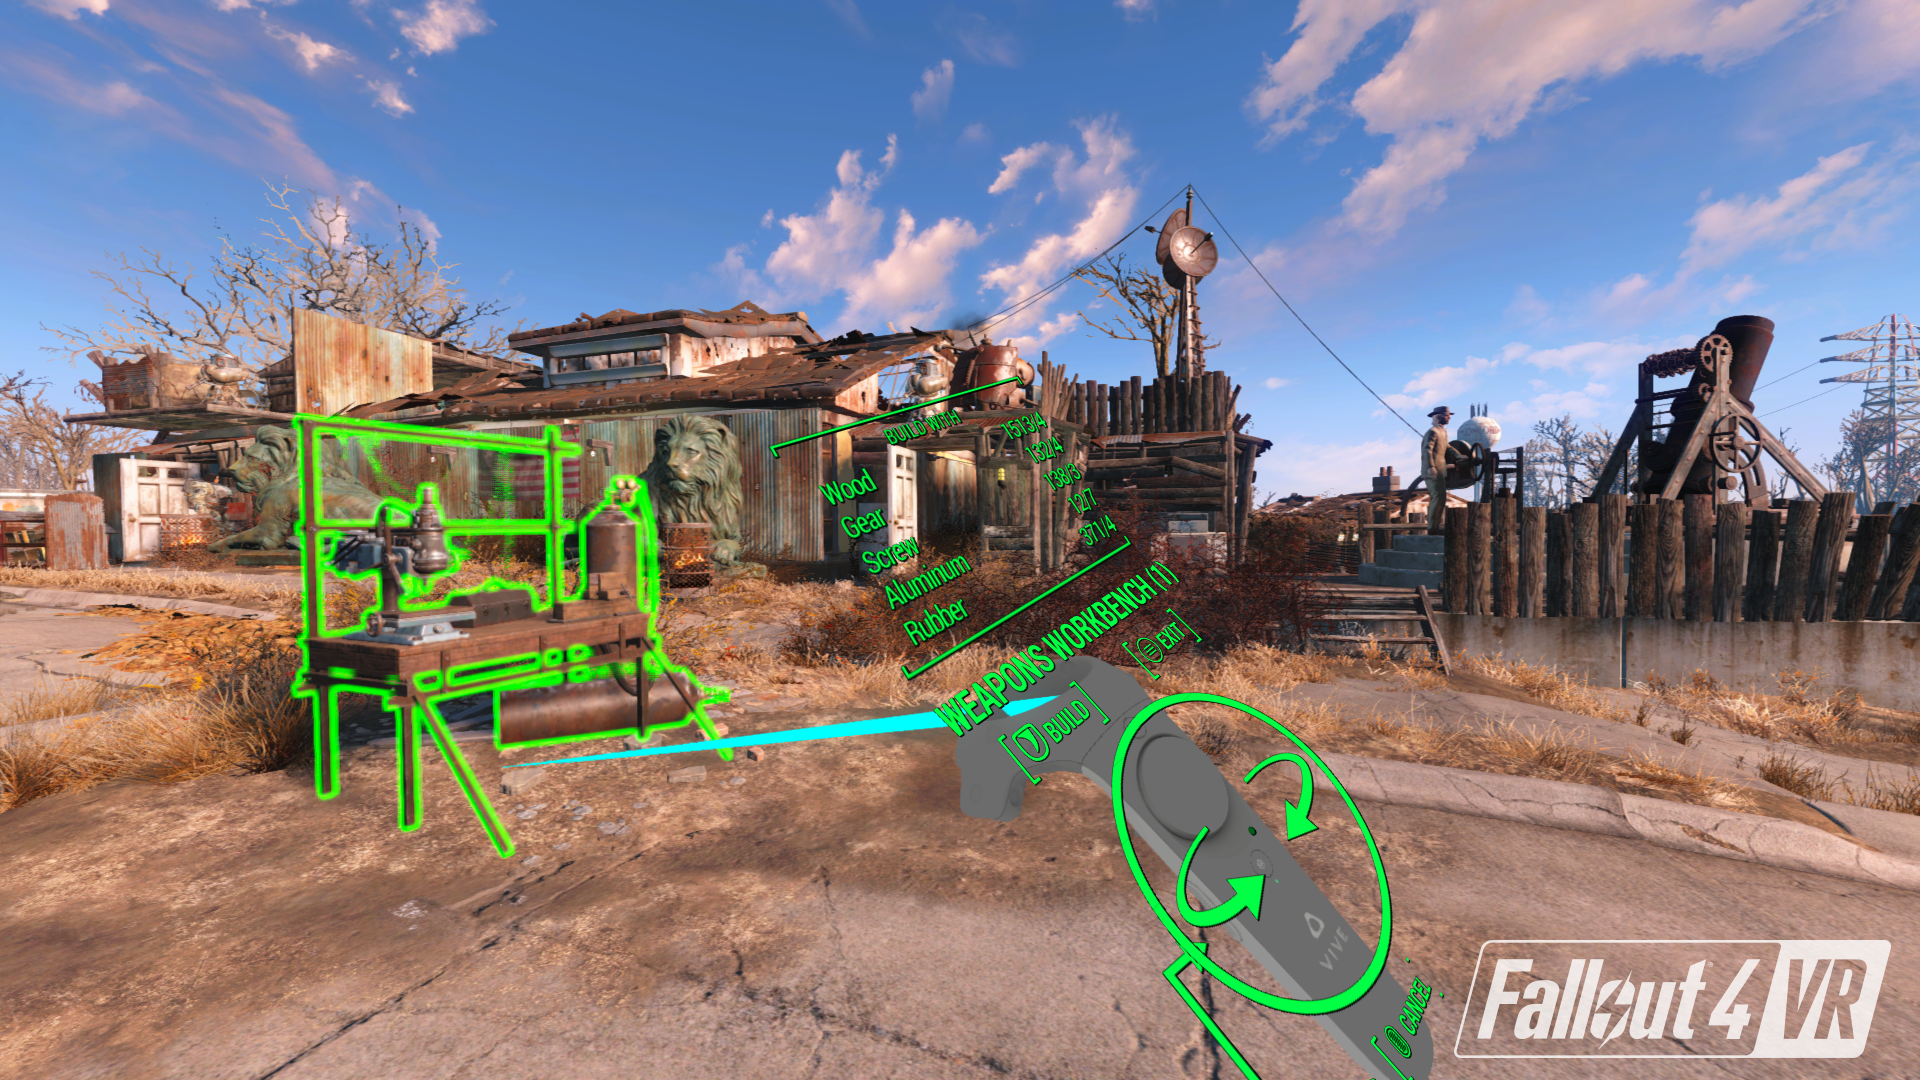 Image for Fallout 4 VR is out now, so you can feel closer to the wasteland than ever before